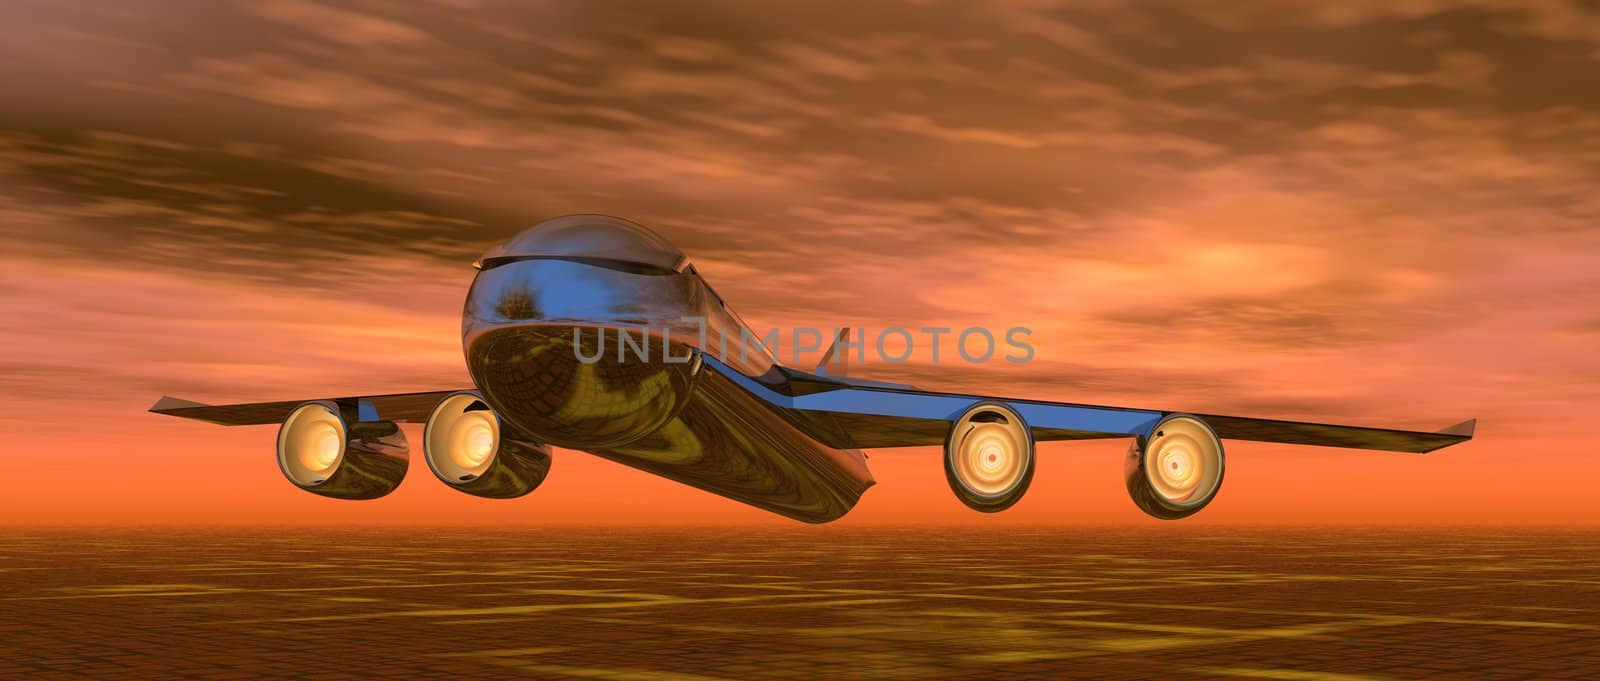 illustration of an aeroplane flying in a sunset sky